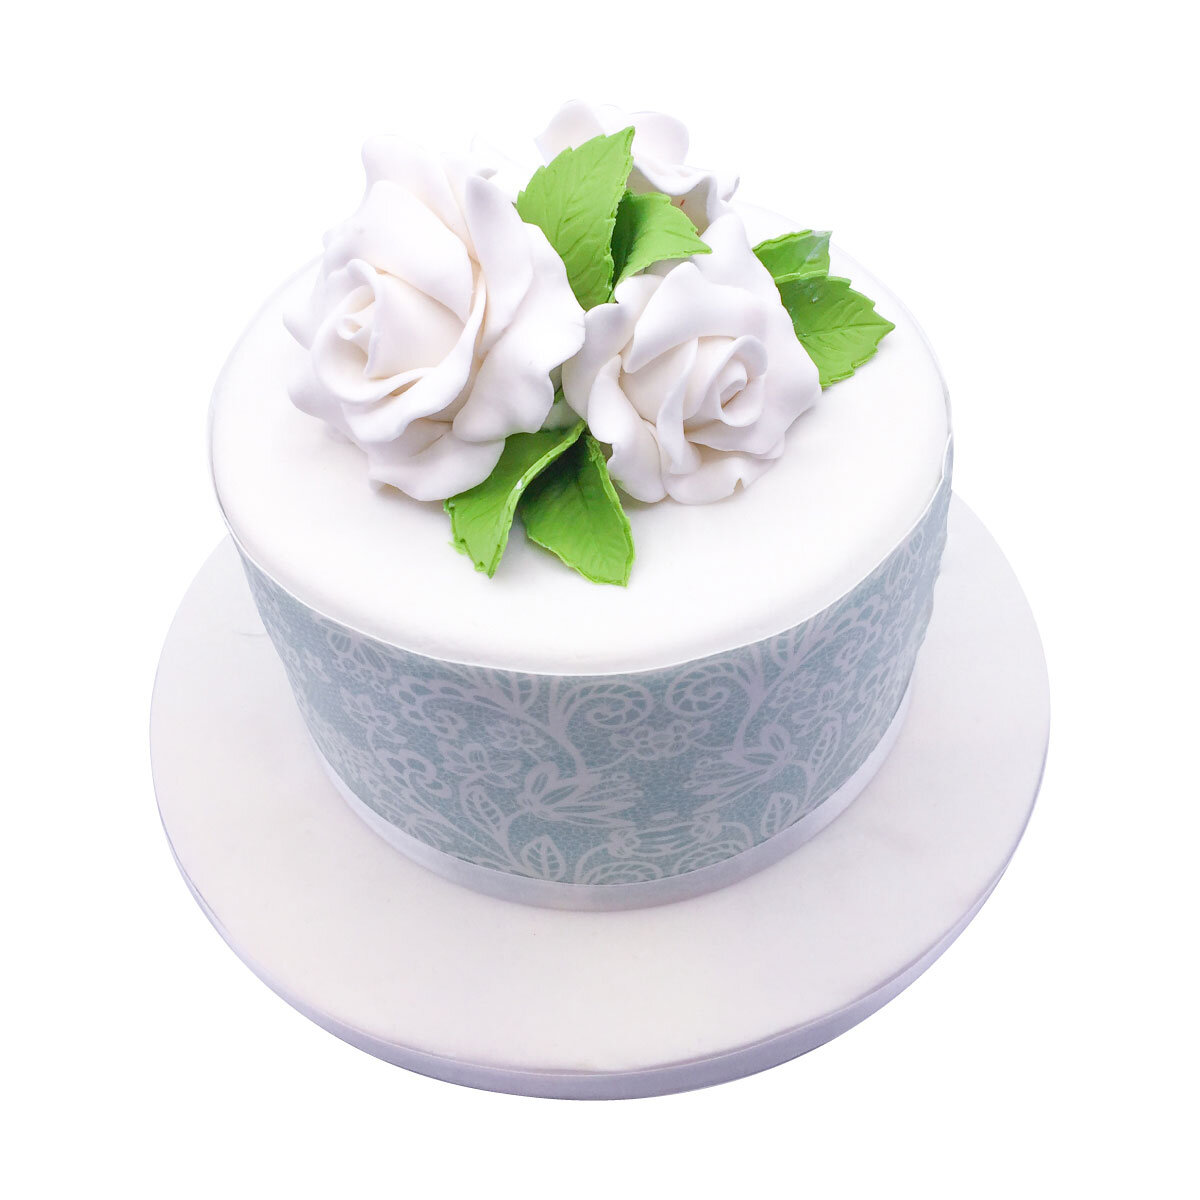 Whit ecake with icing flowers and green leaves on the top